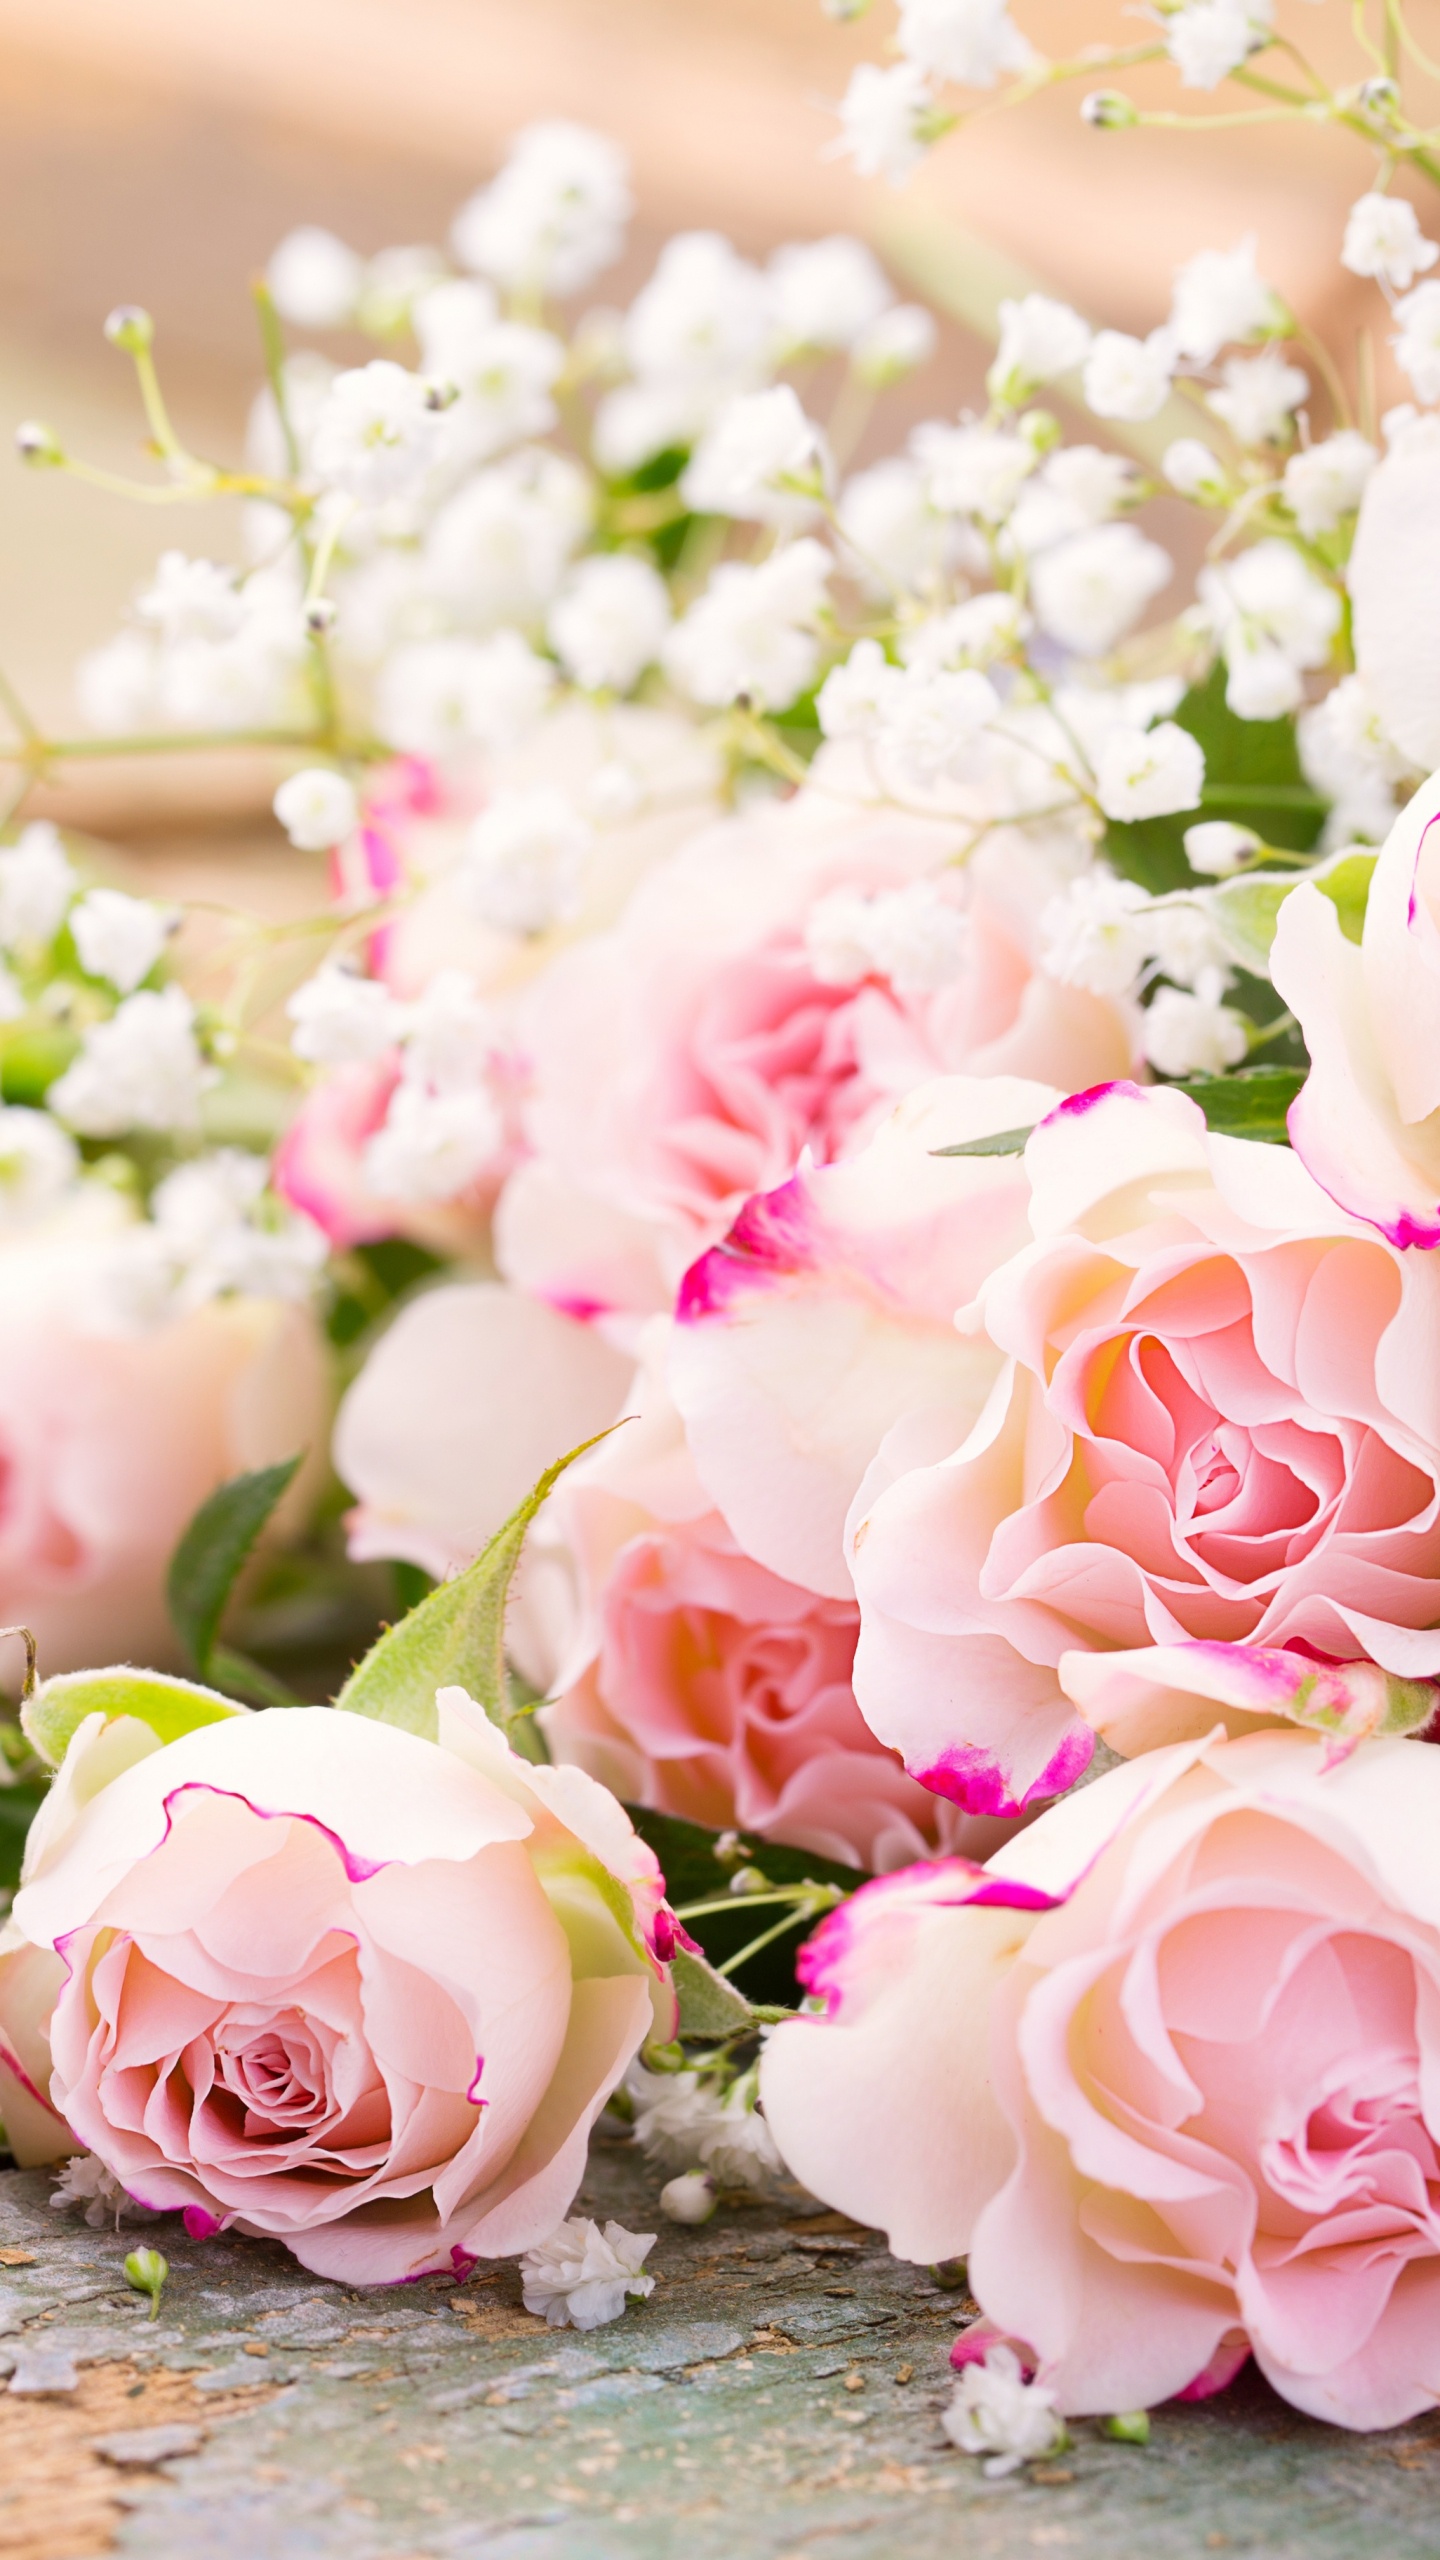 Bouquet de Roses Roses et Blanches. Wallpaper in 1440x2560 Resolution